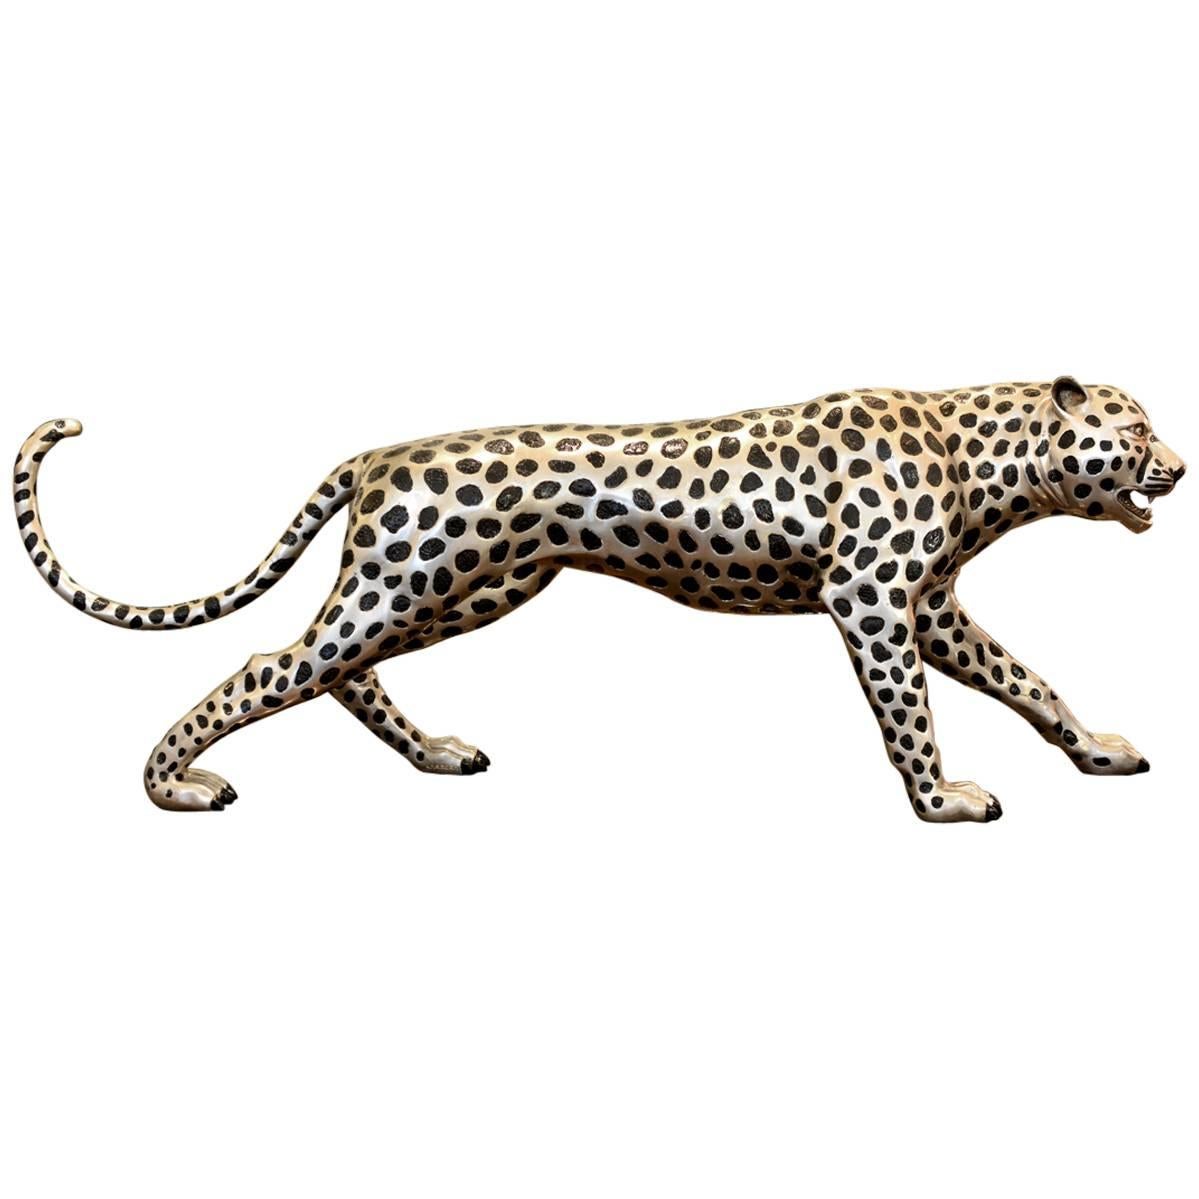 Guepard Sculpture in Black and Silvered Bronze Finish